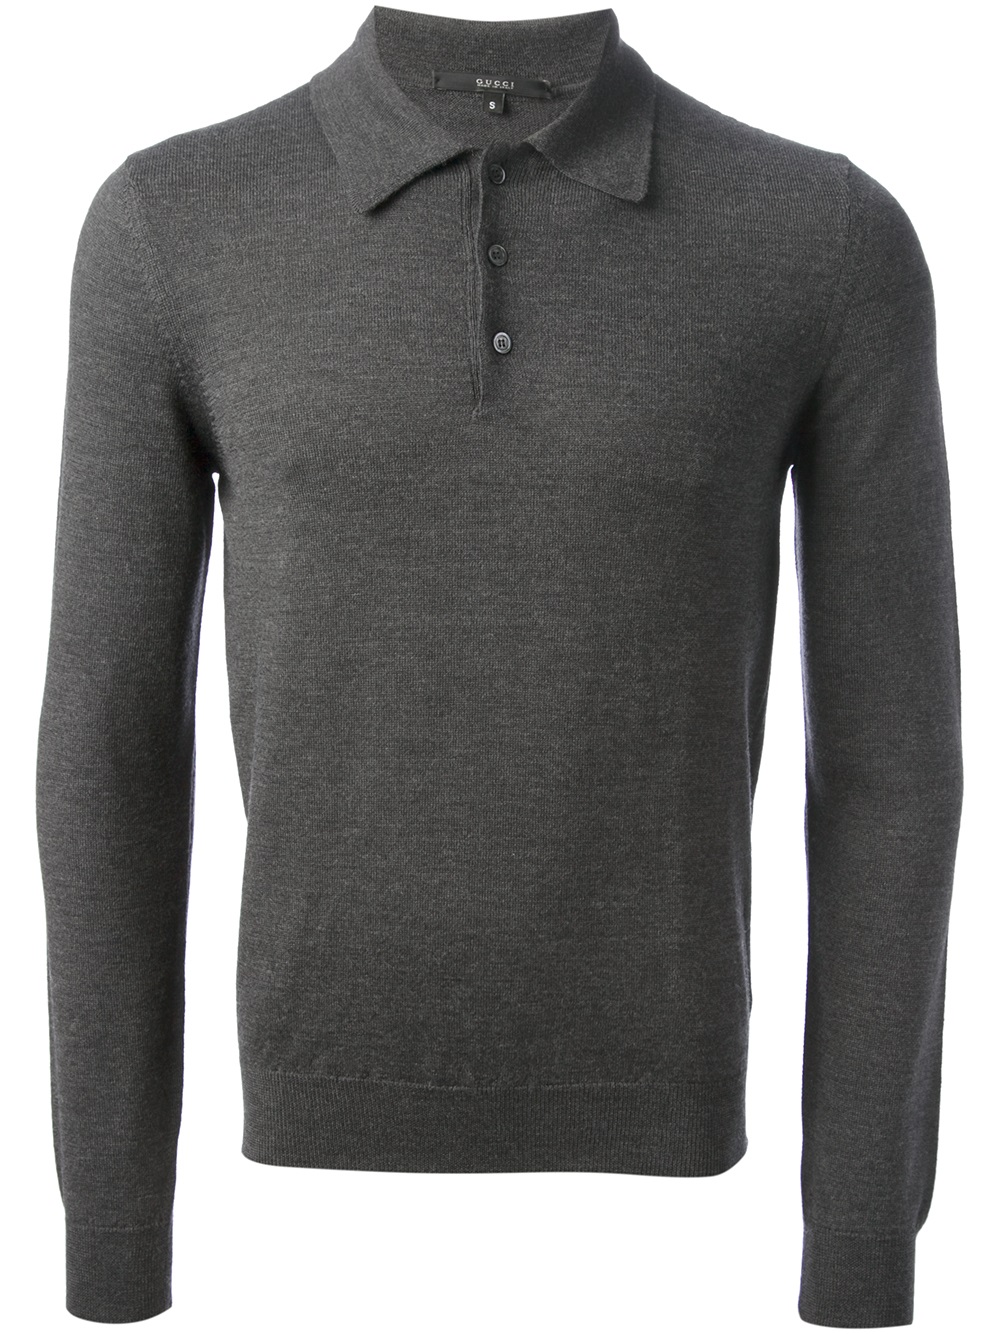 Lyst - Gucci Knitted Polo Shirt in Gray for Men